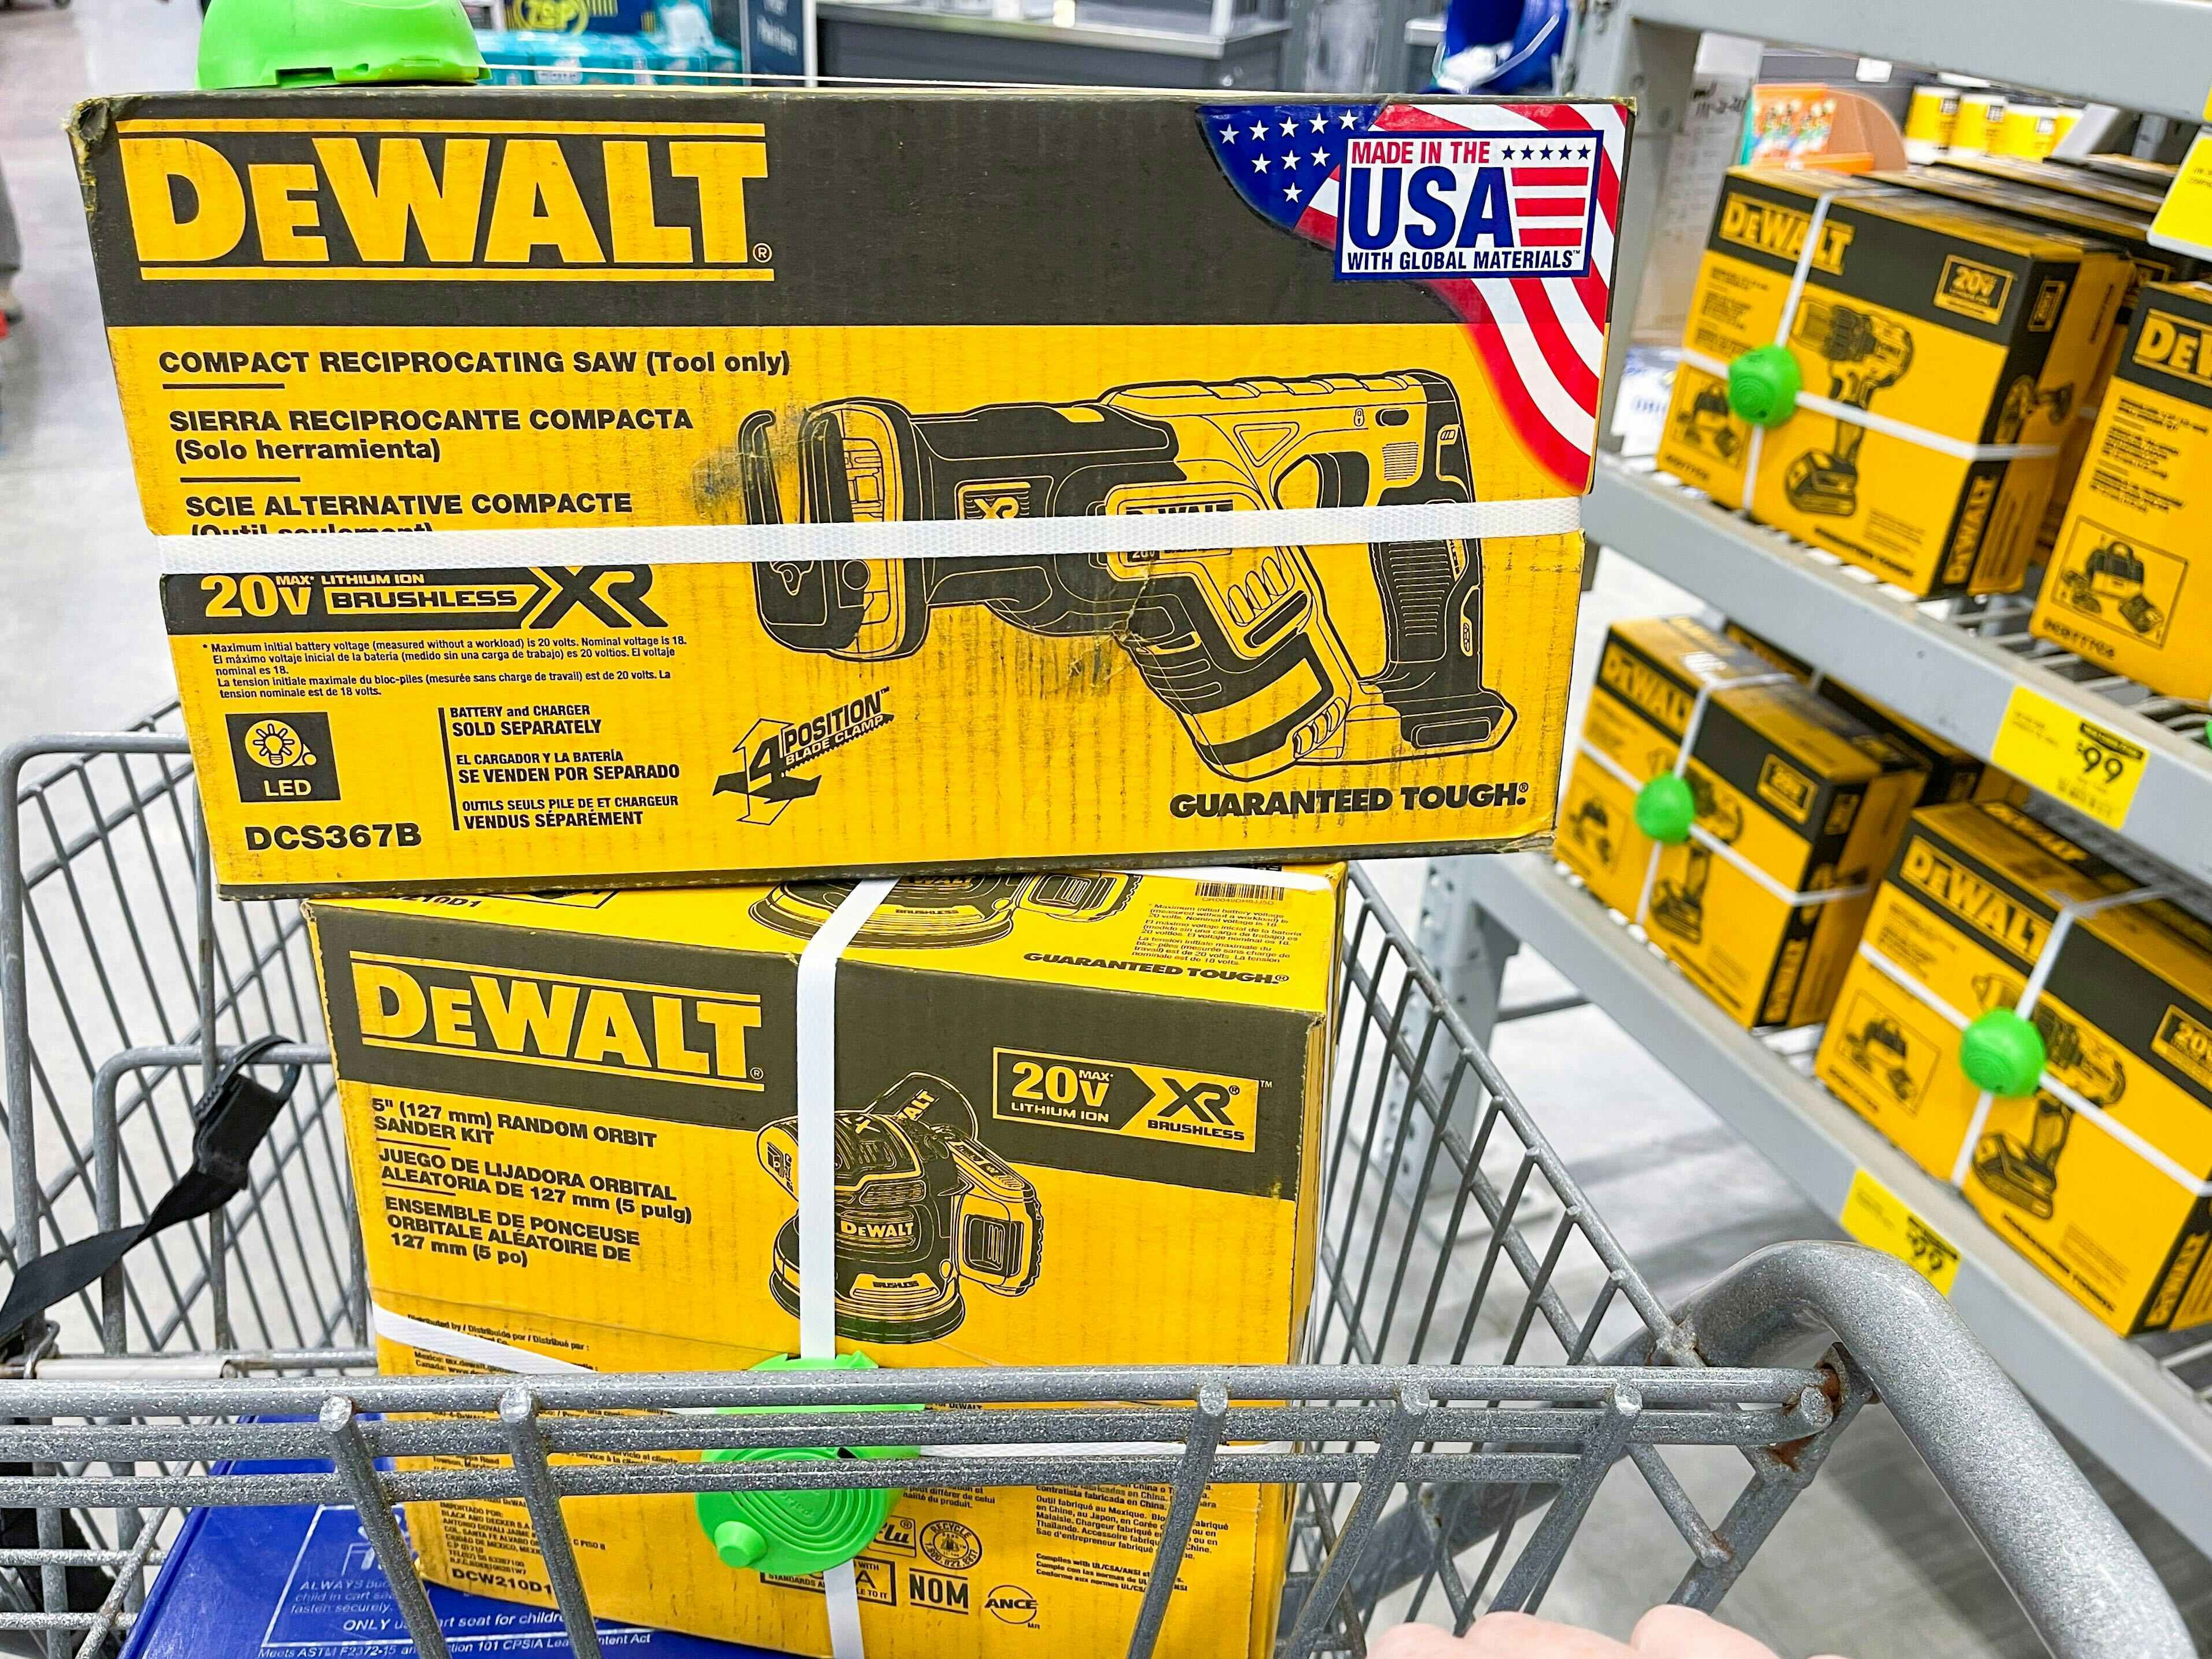 Dewalt power tools in their boxes, sitting in the basket of a shopping cart at Lowe's black friday..